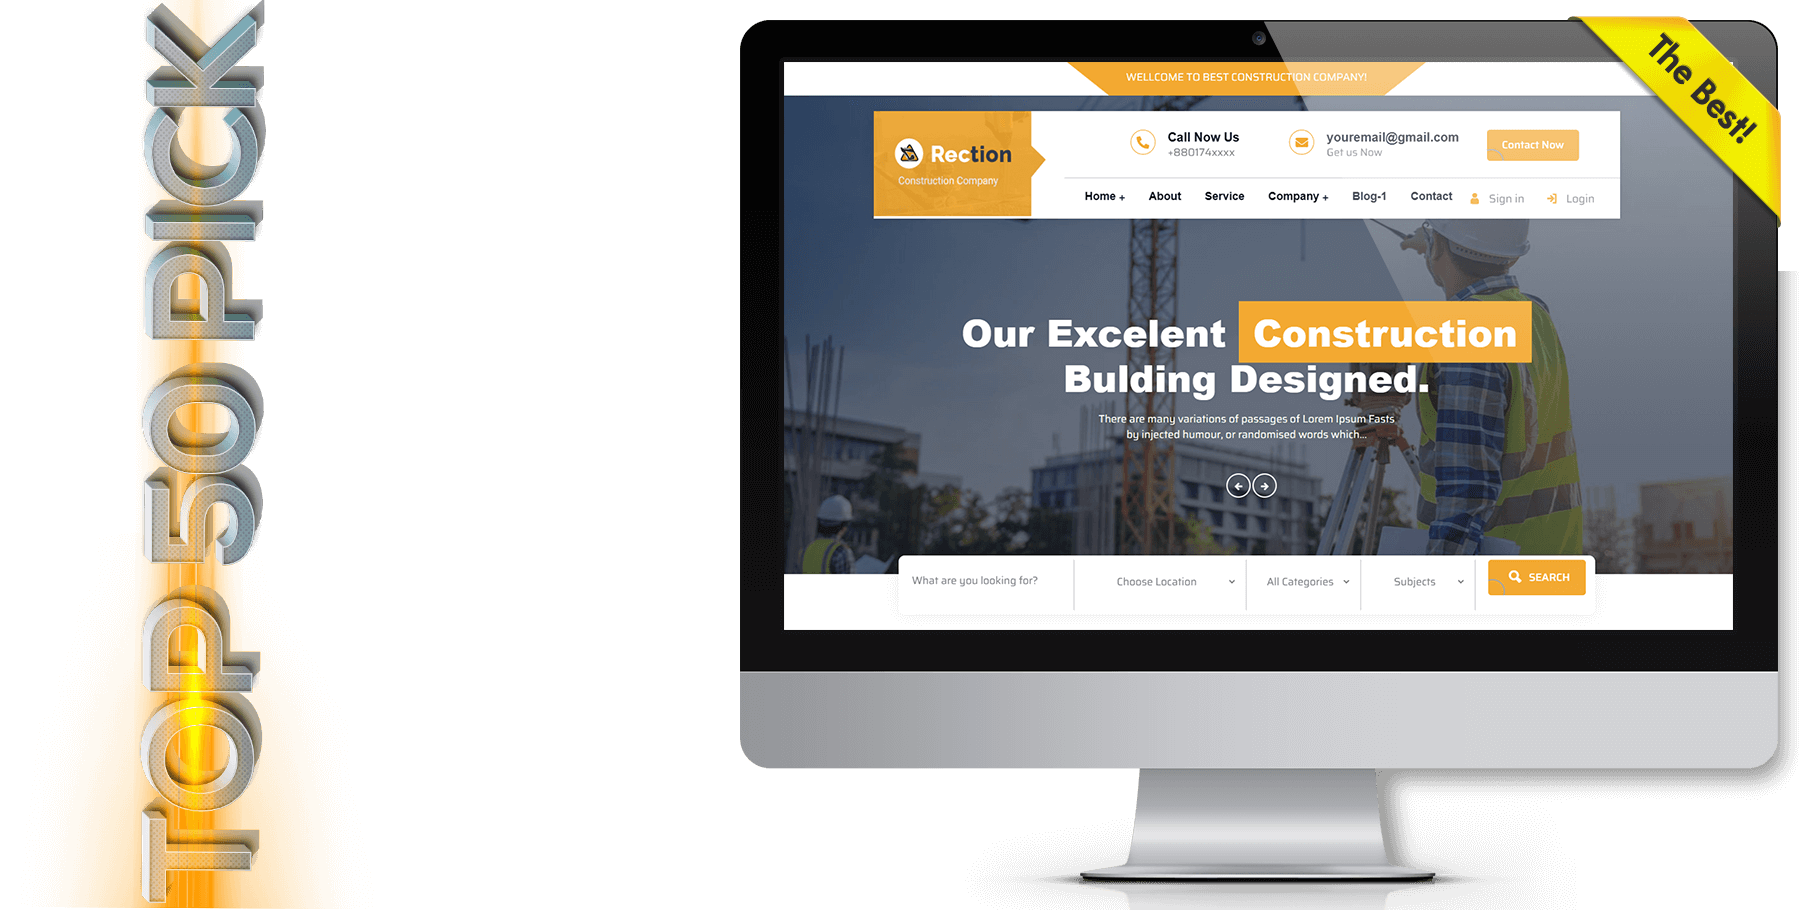 A website design in construction named Rection